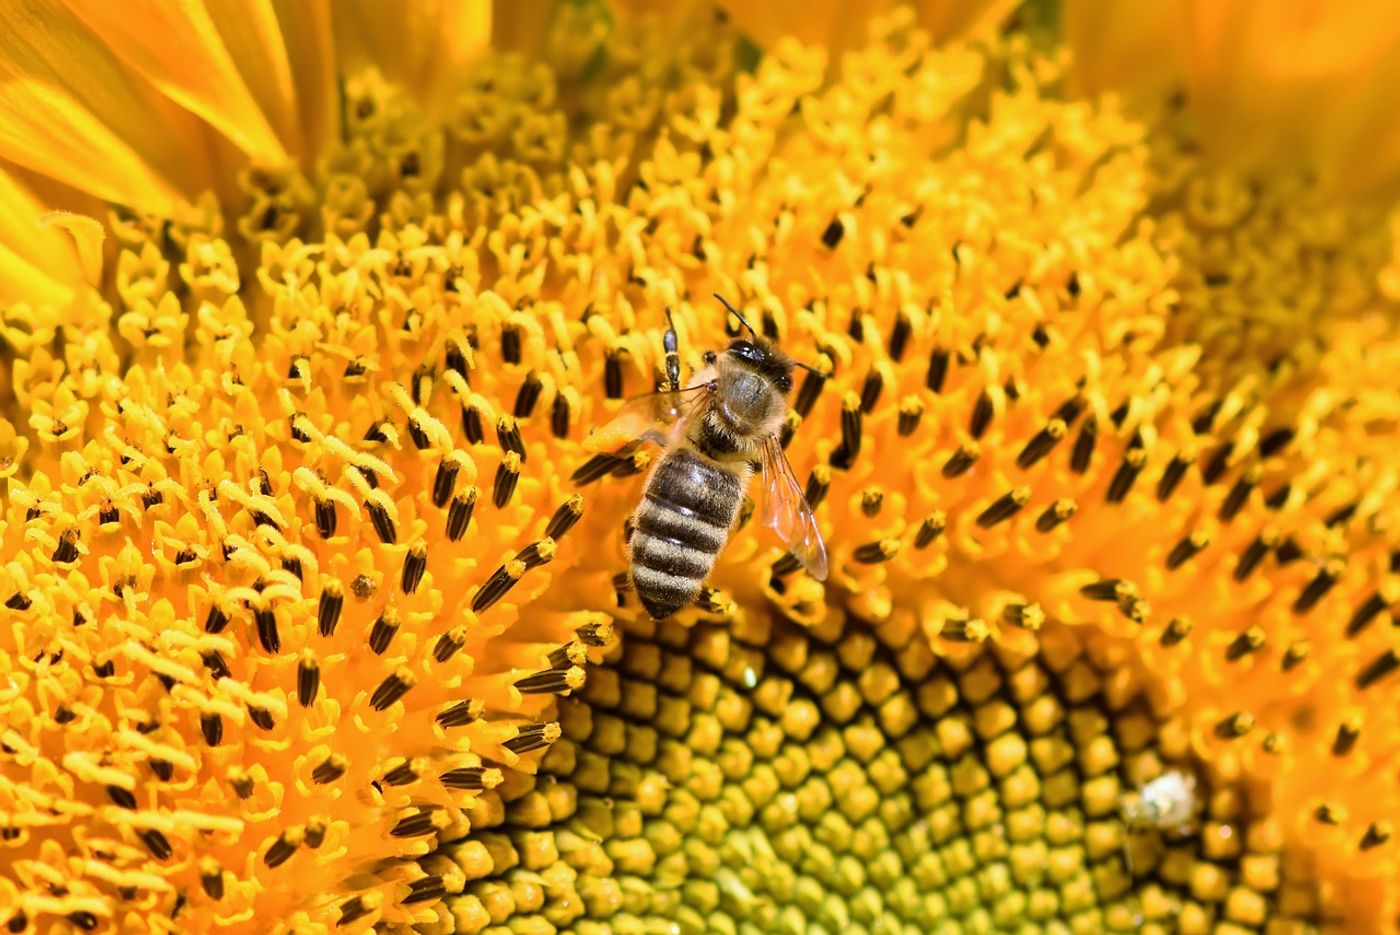 Bees are impacted by pesticides, and future alternatives may not be any better.